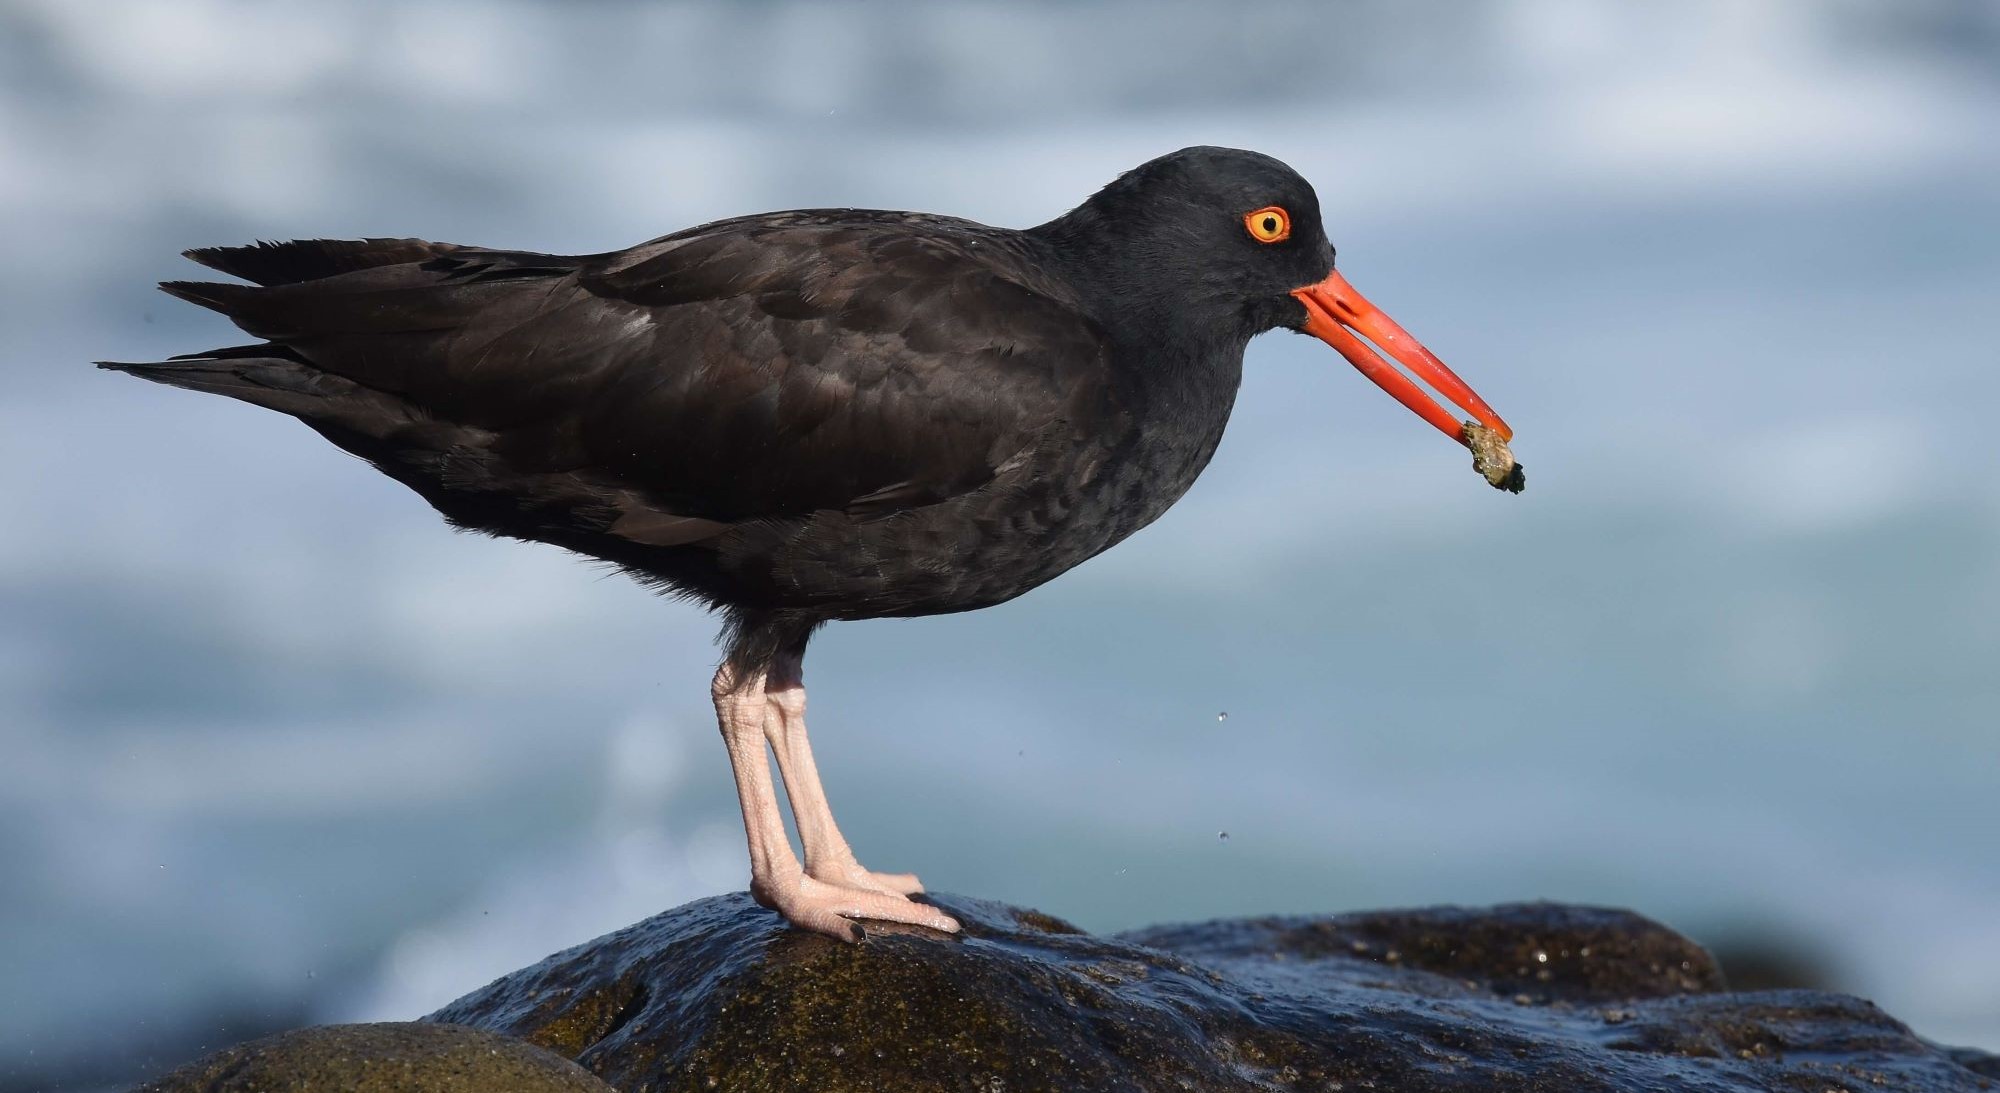 Black oystercatcher. Photo by Andy Reago and Chrissy McClaren, Creative Commons